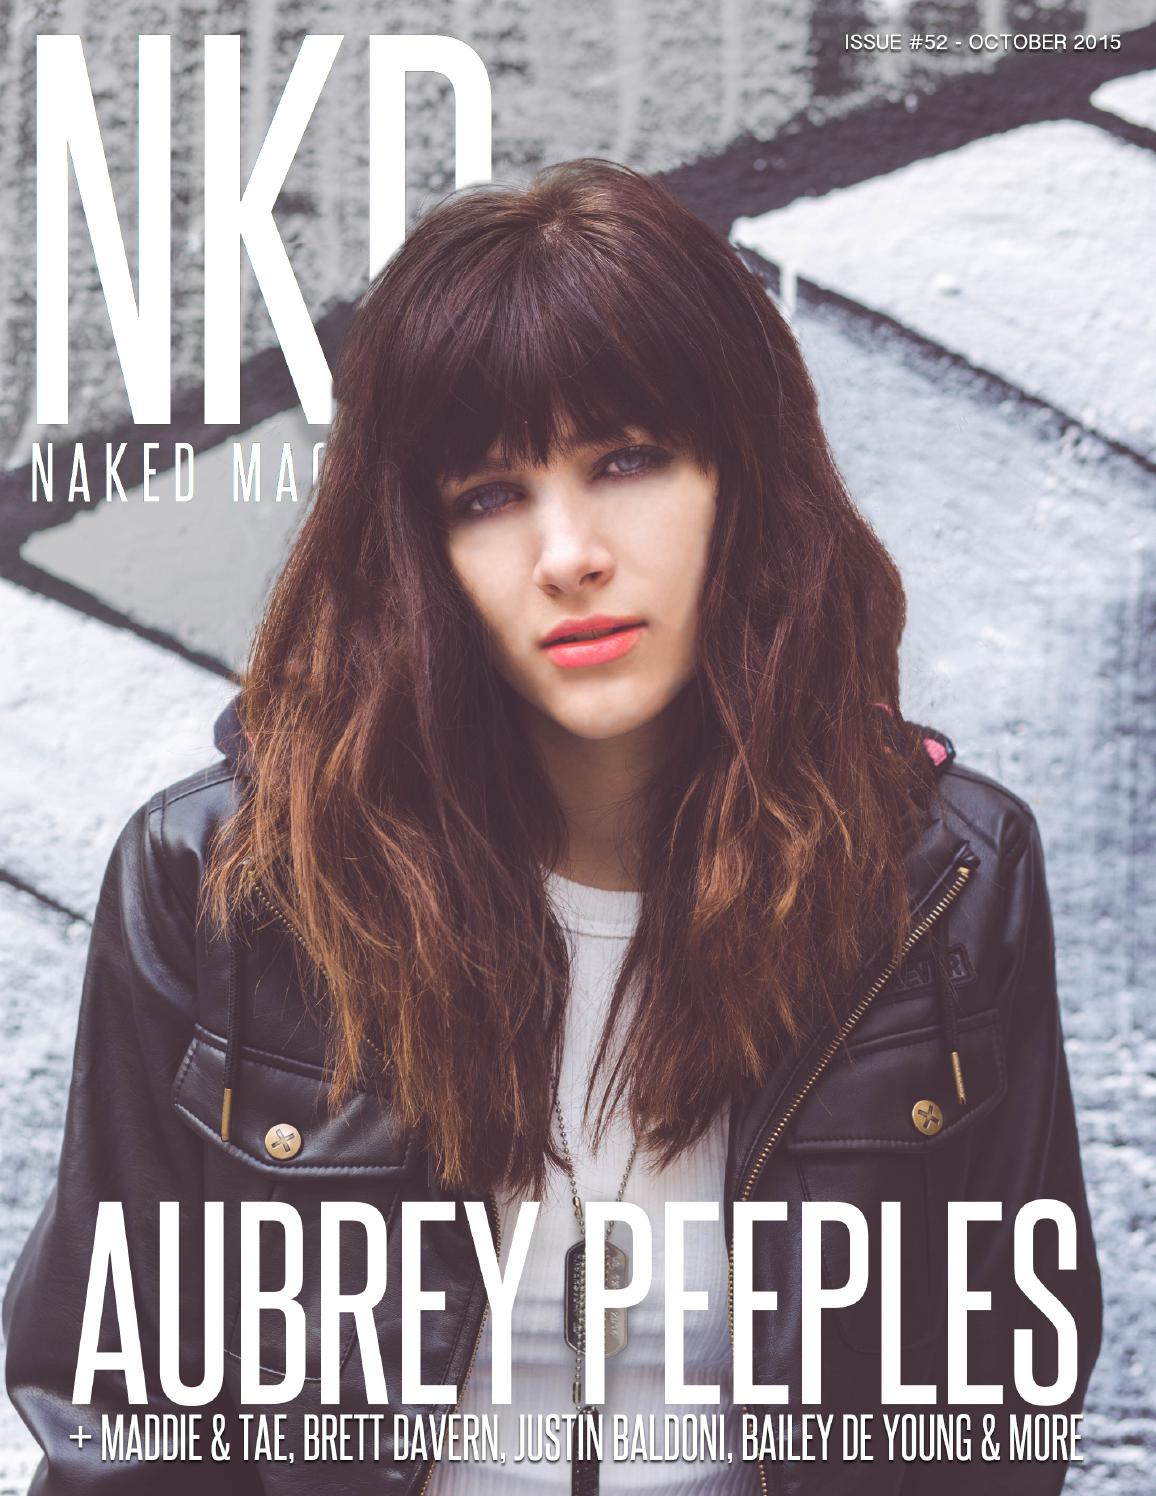 anthon meyer recommends aubrey peeples naked pic